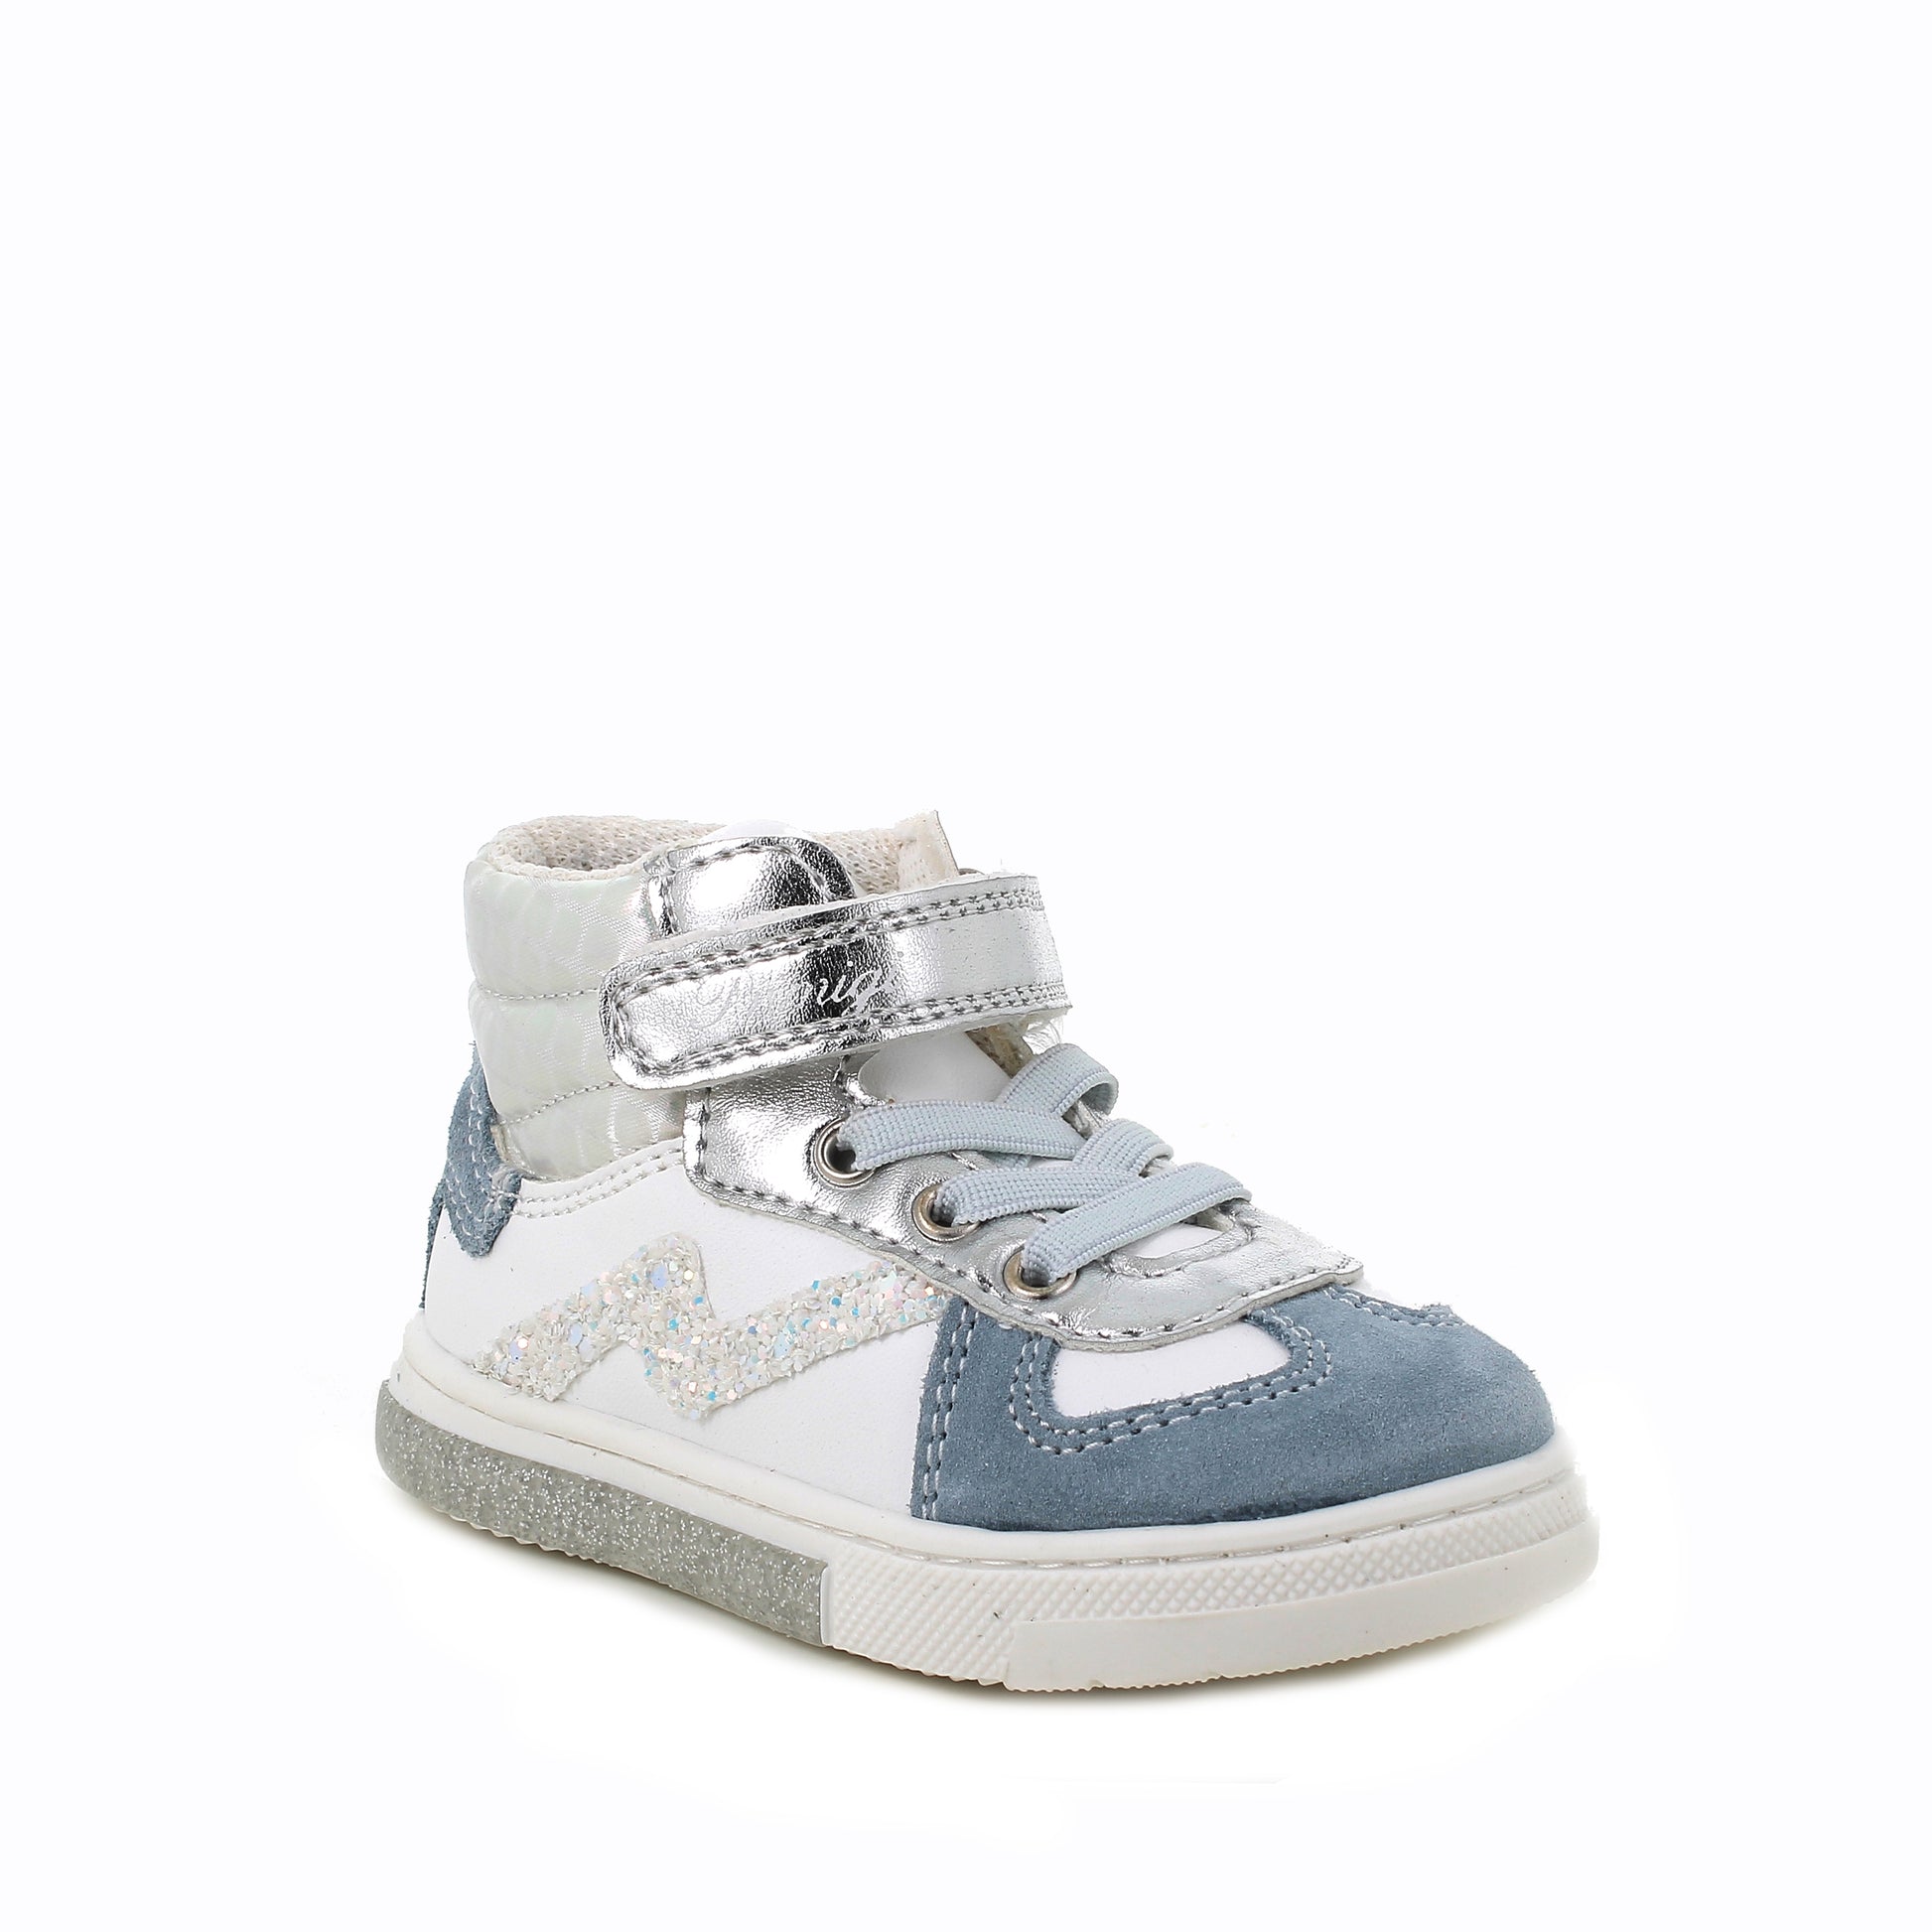 A girls Hi-Top boot by Primigi, style 4904500 Baby Glitter, in white, silver and blue leather with glitter trim, faux laces and velcro fastening. Right angled view.